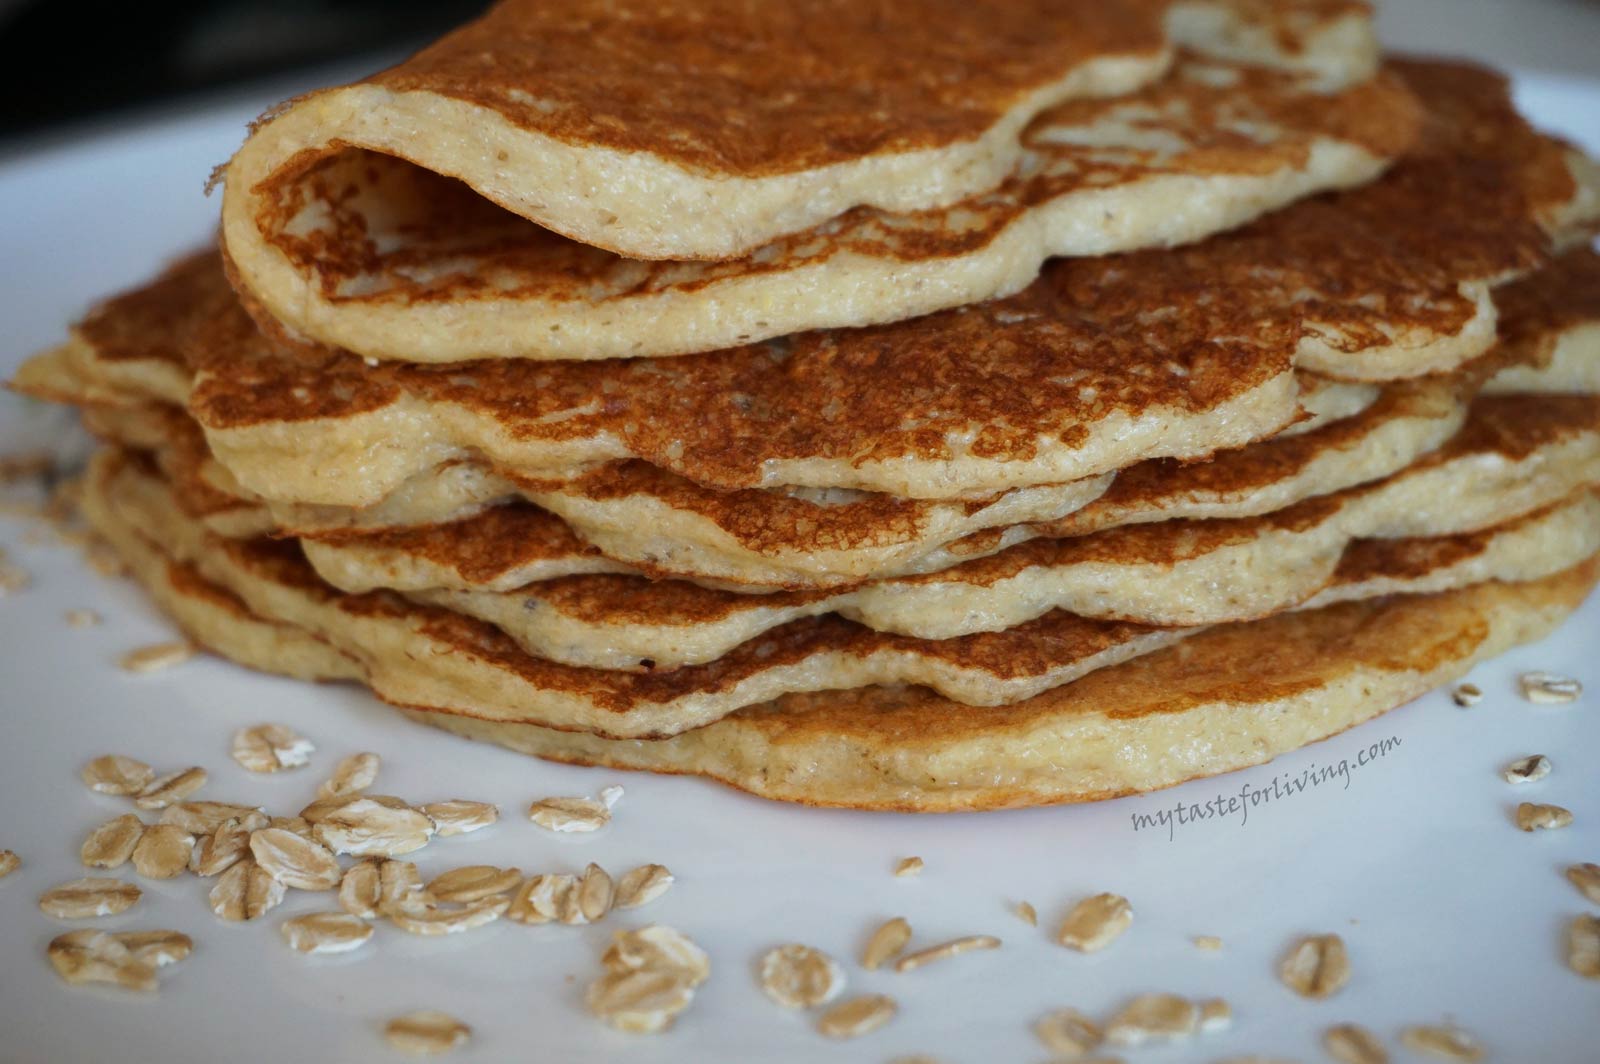 Delicious, nutritious and healthy pancakes prepared with old fashioned rolled oats and skyr, without flour.